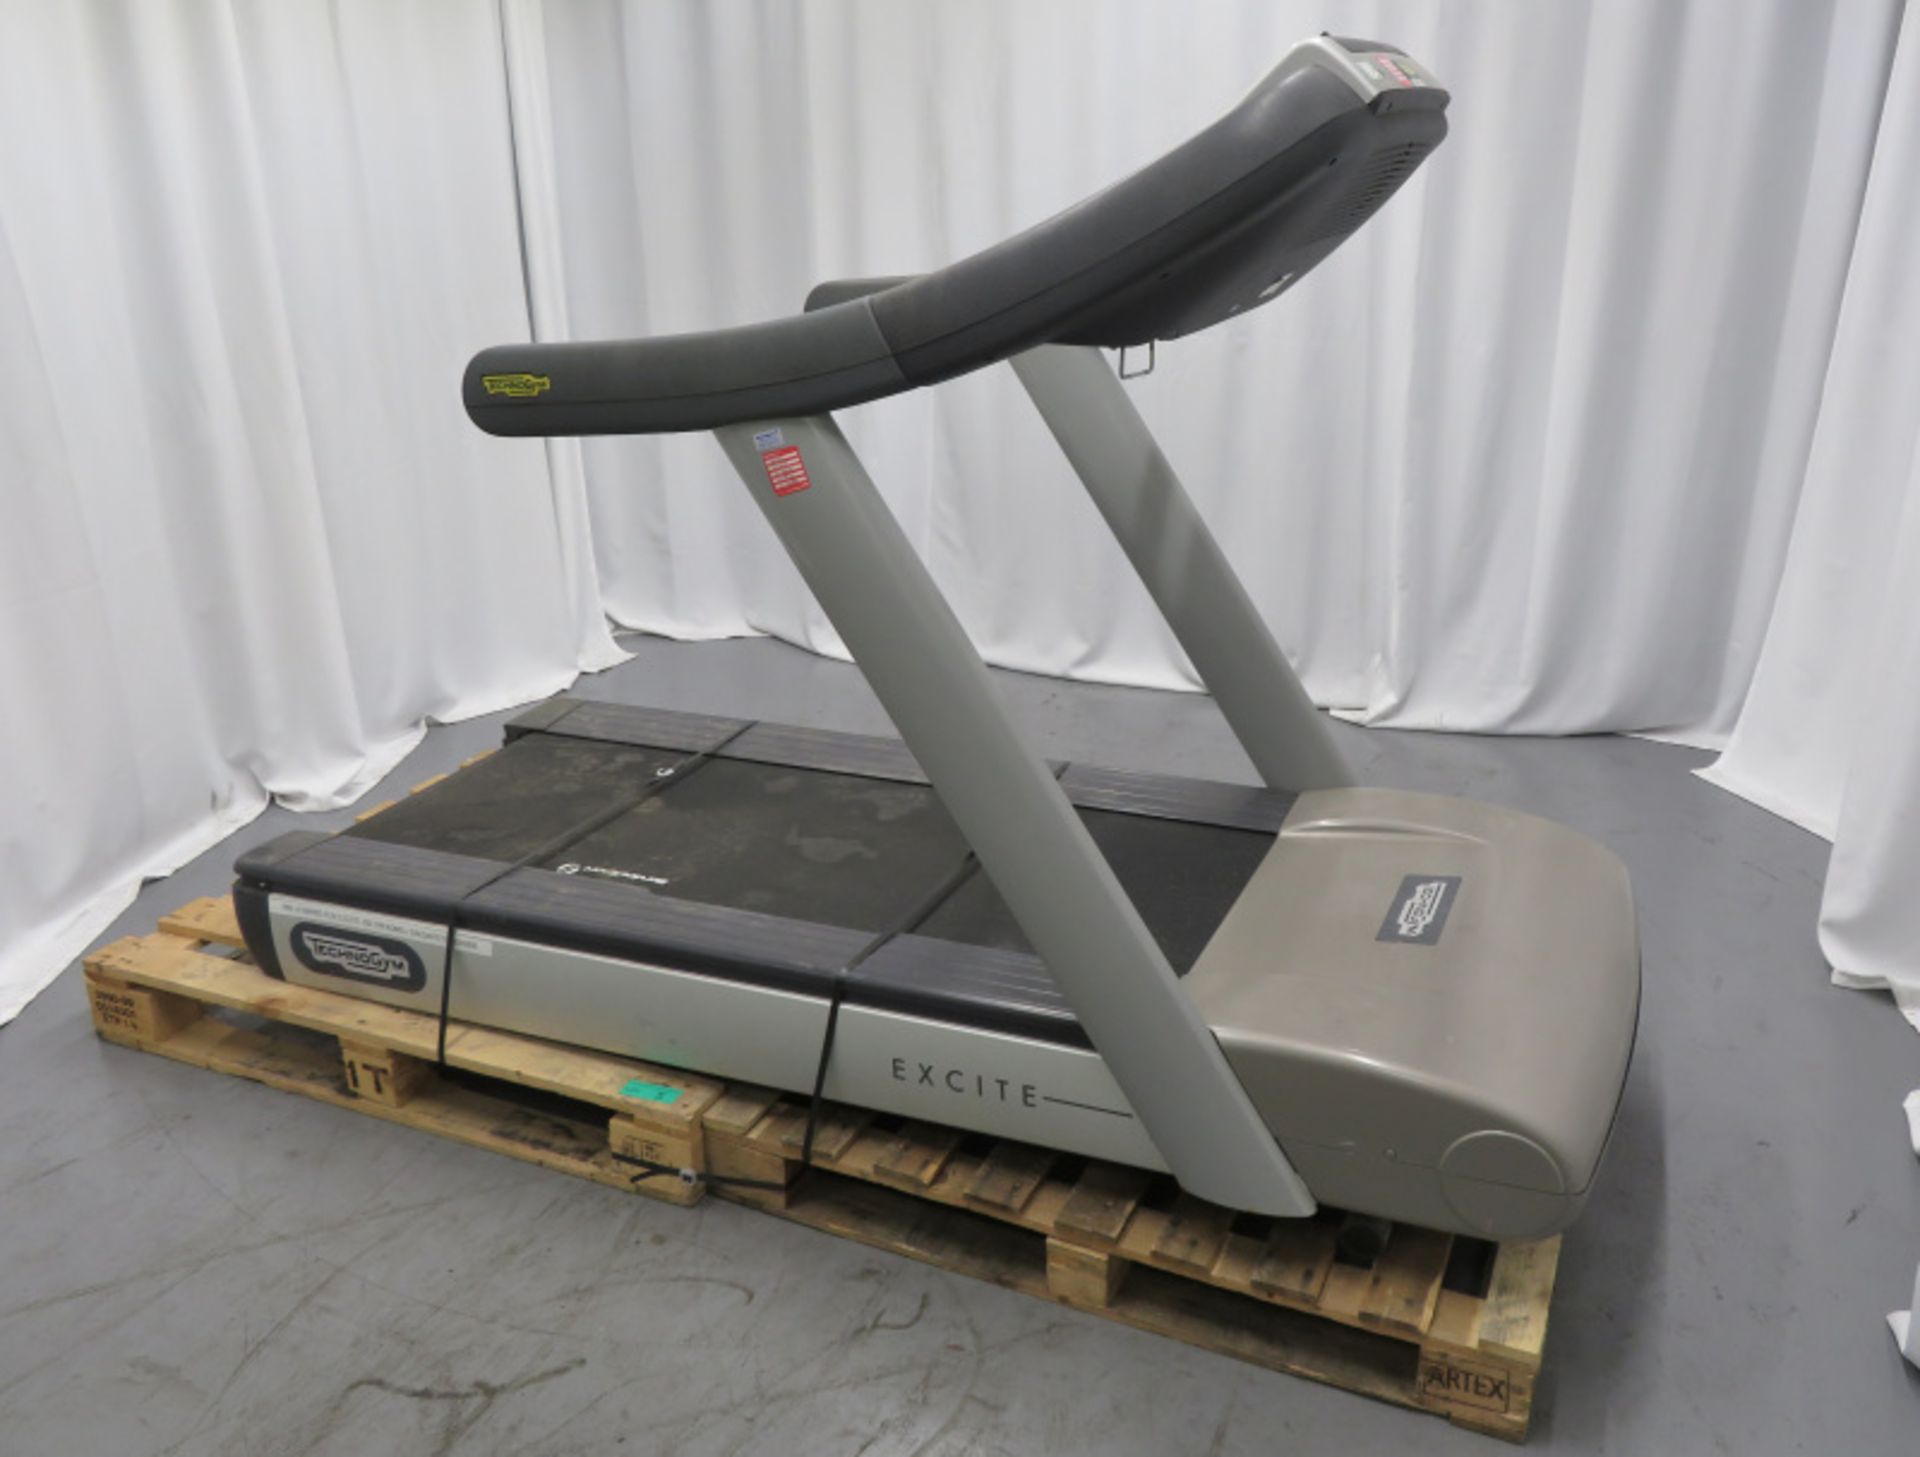 Technogym Excite Treadmill - Please check pictures for overall condition - Image 3 of 10